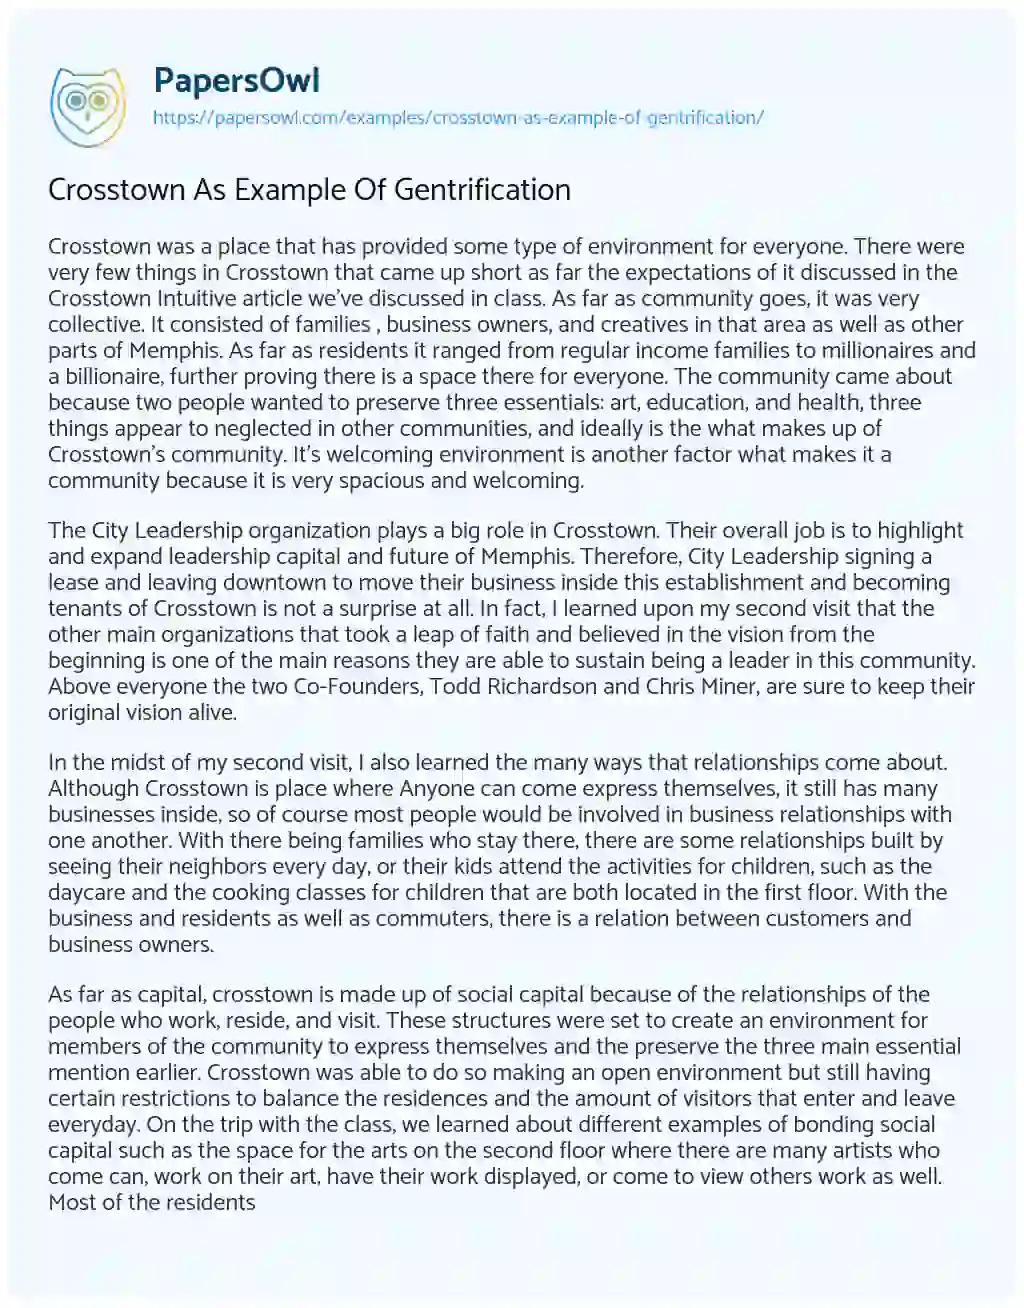 Essay on Crosstown as Example of Gentrification